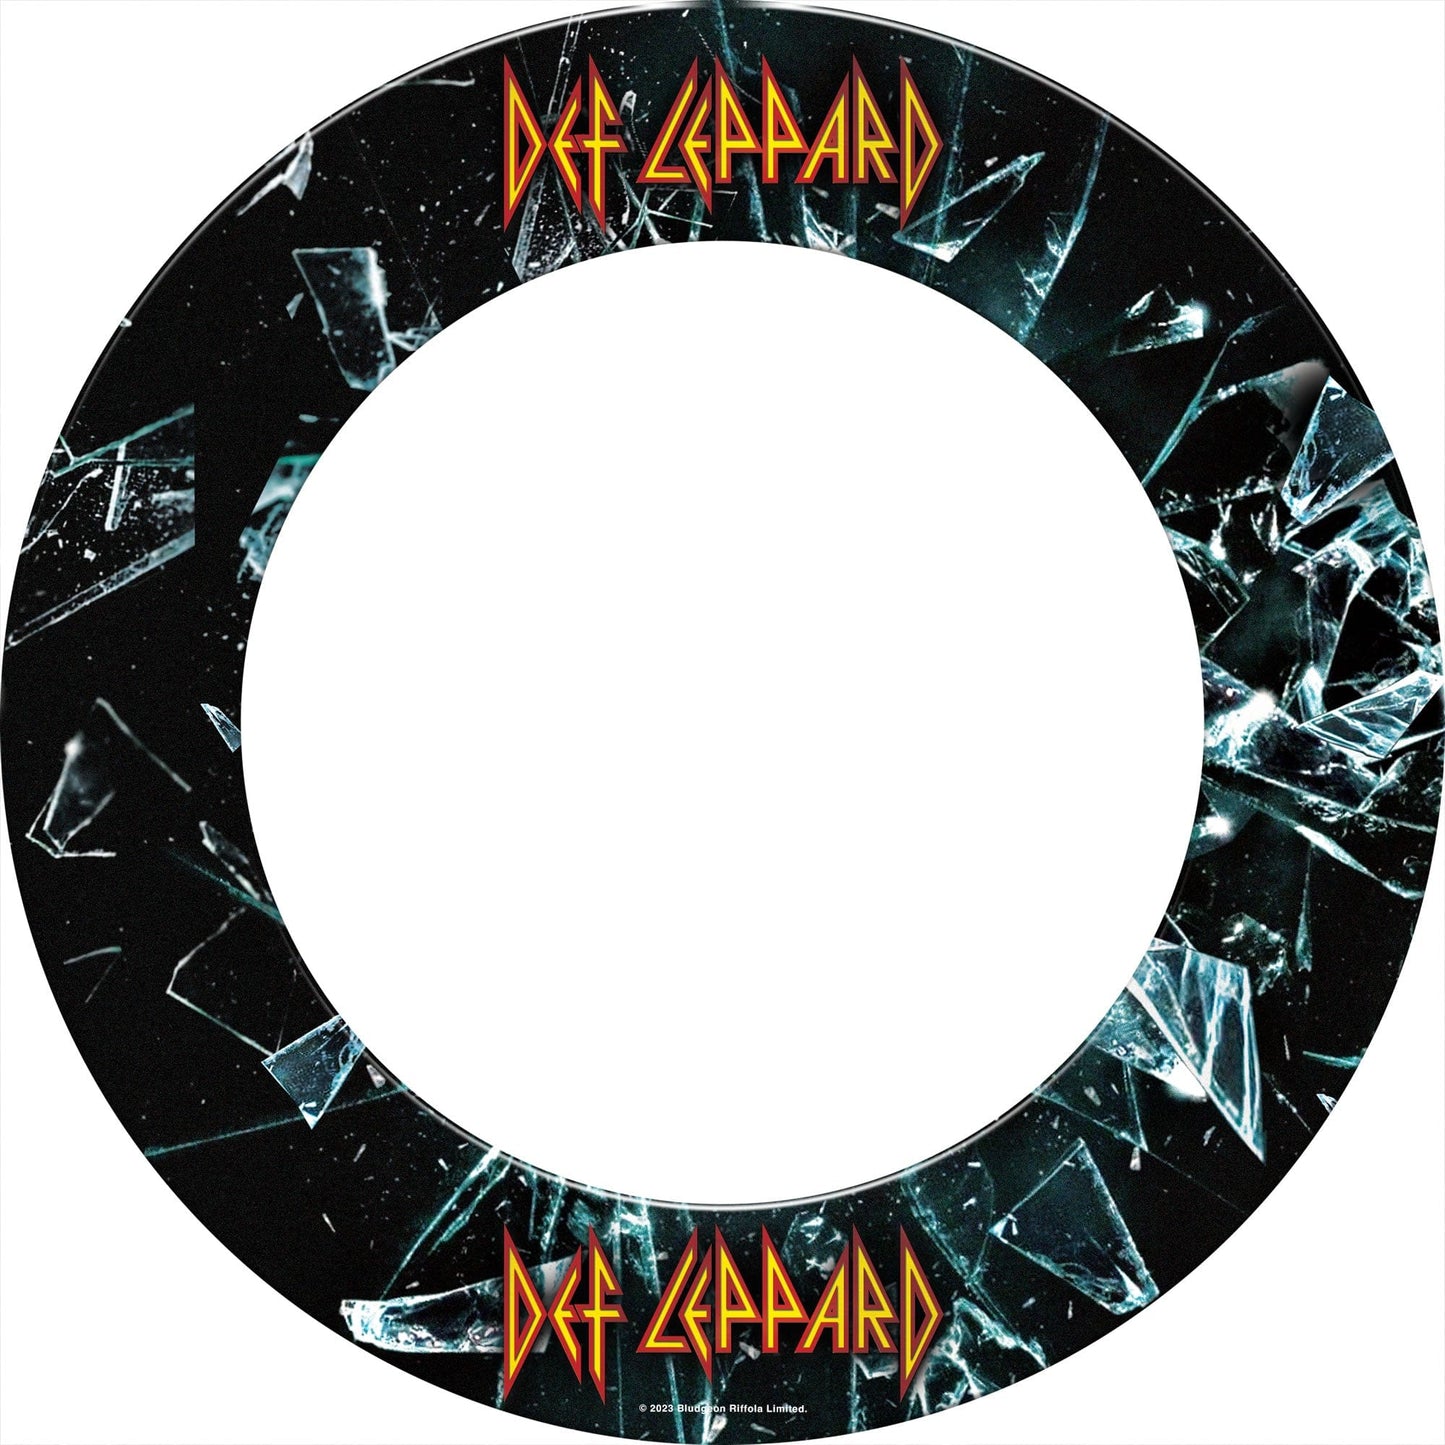 Def Leppard Dartboard Surround - Official Licensed - S2 - Professional - Shattered Glass